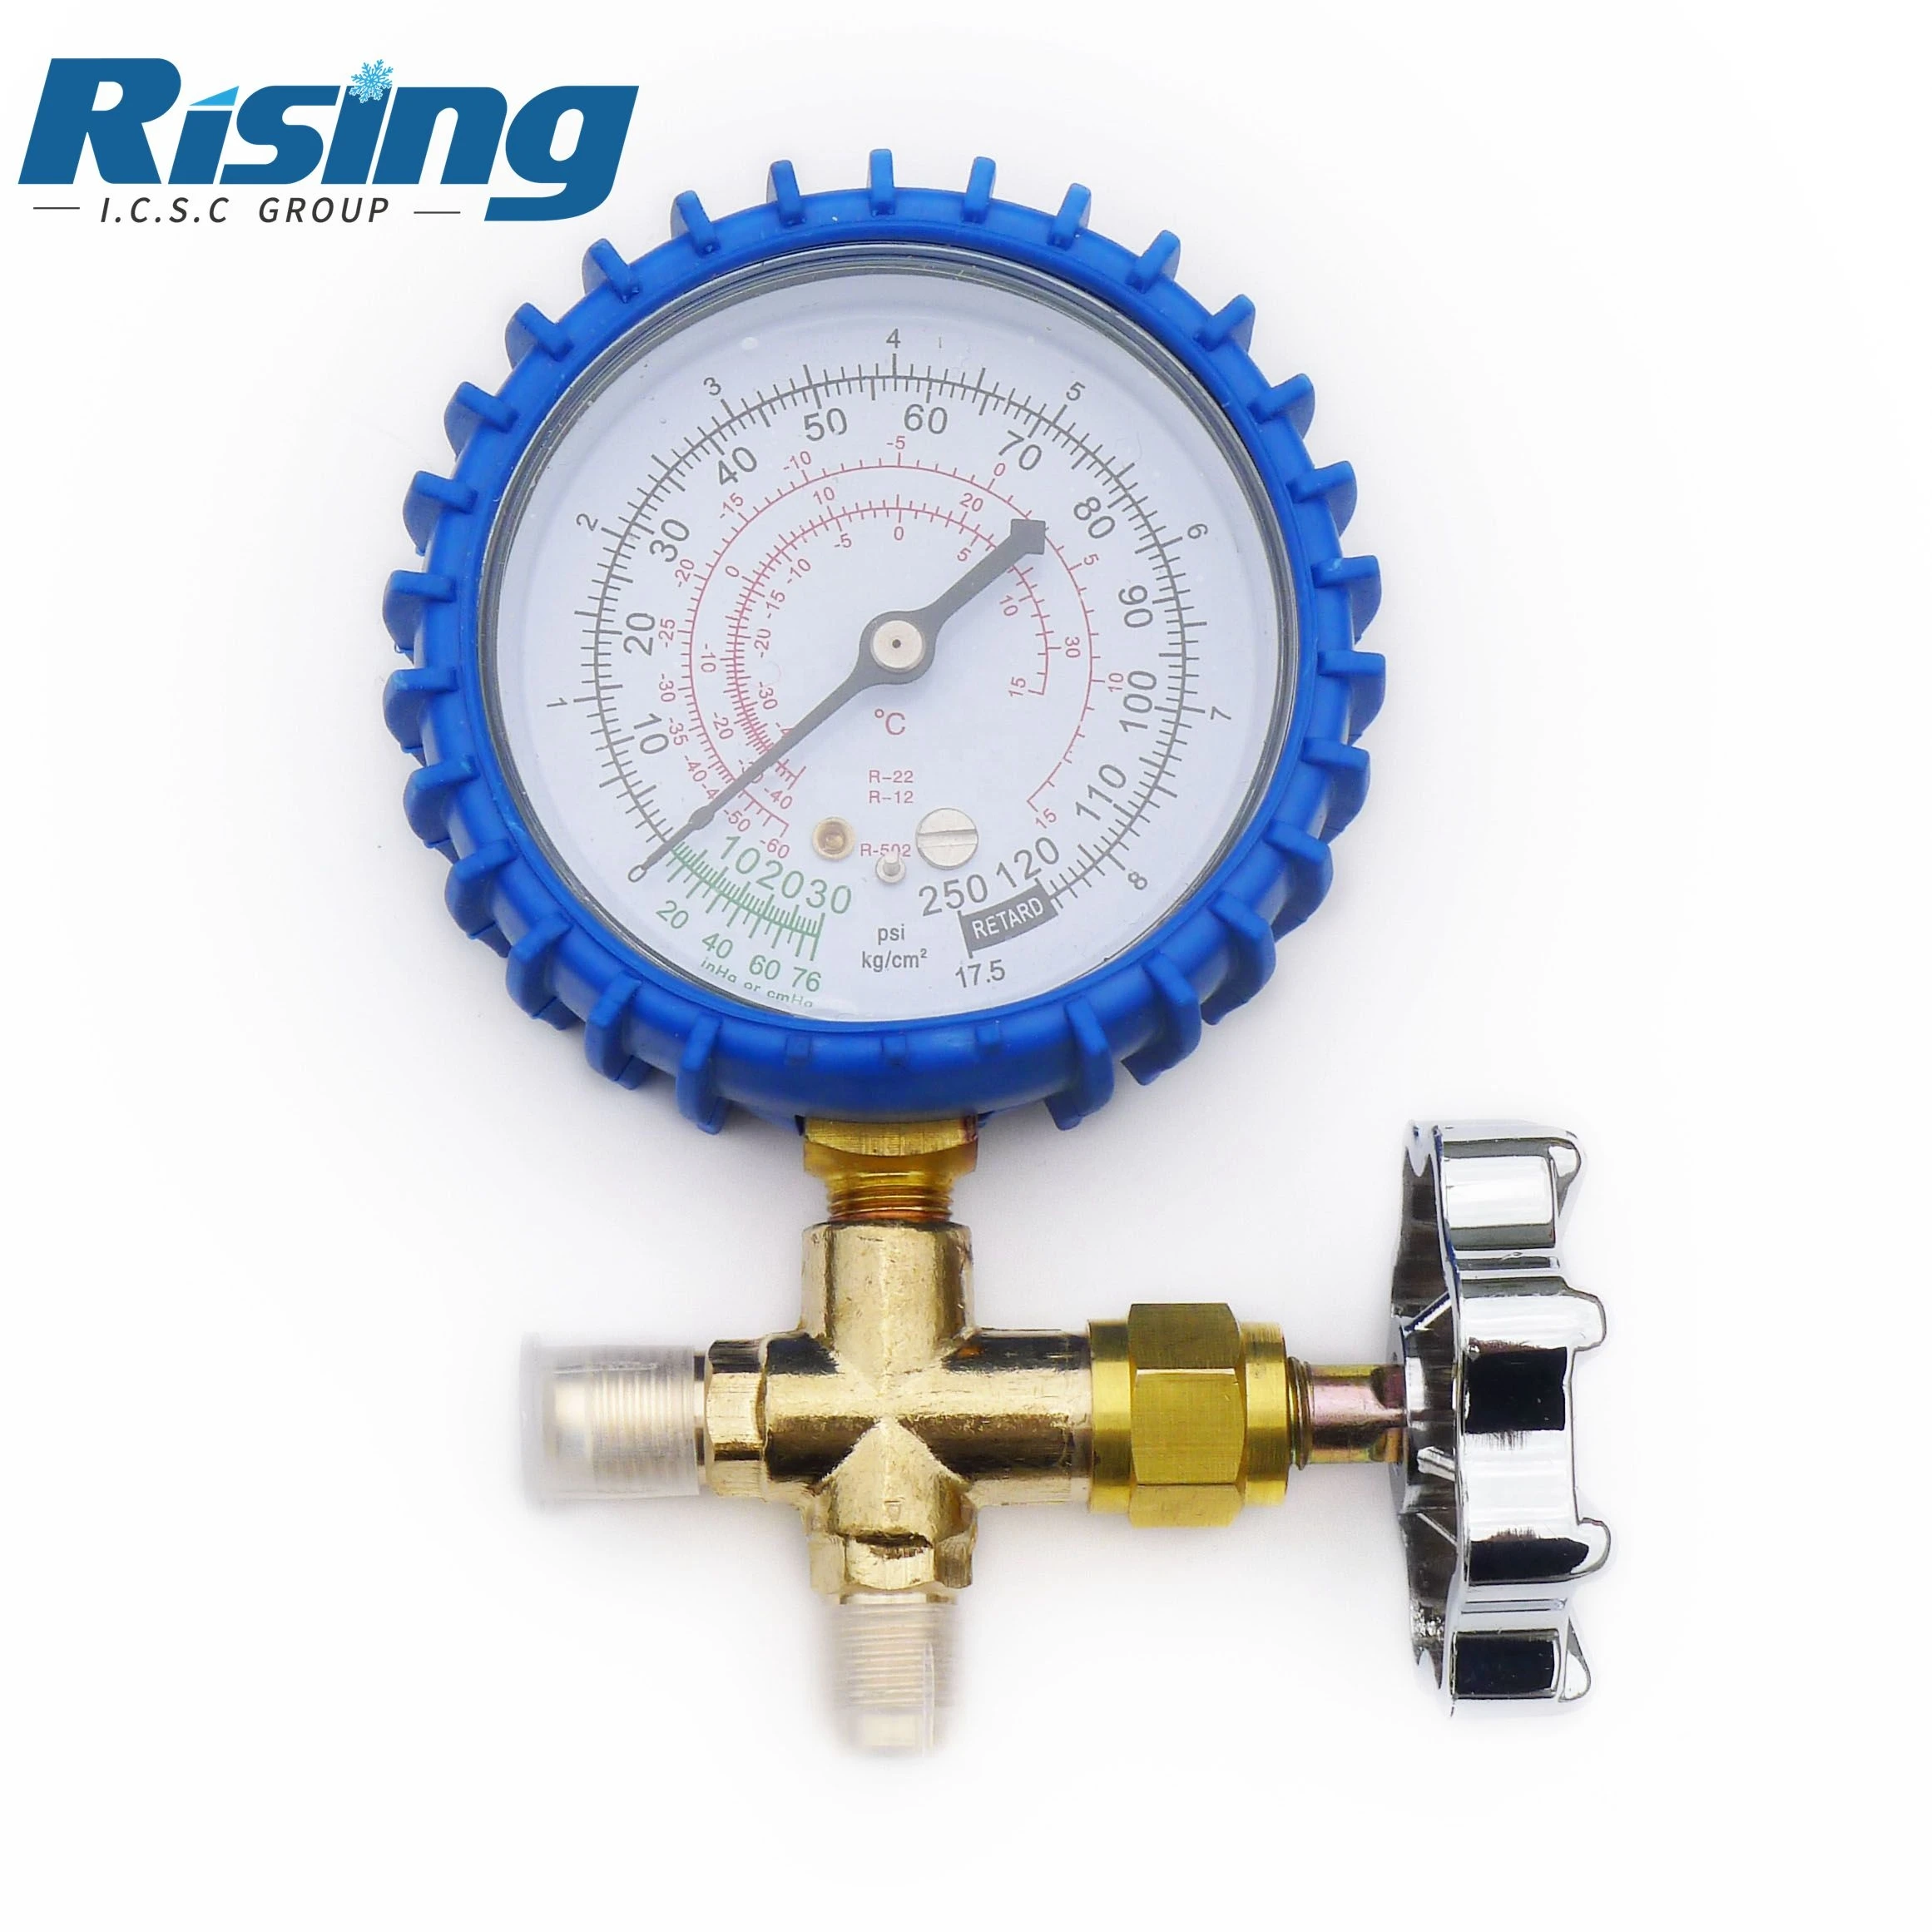 Factory Price Hot Sale ac brass refrigerant single manifold pressure gauge Refrigeration charging and testing unit